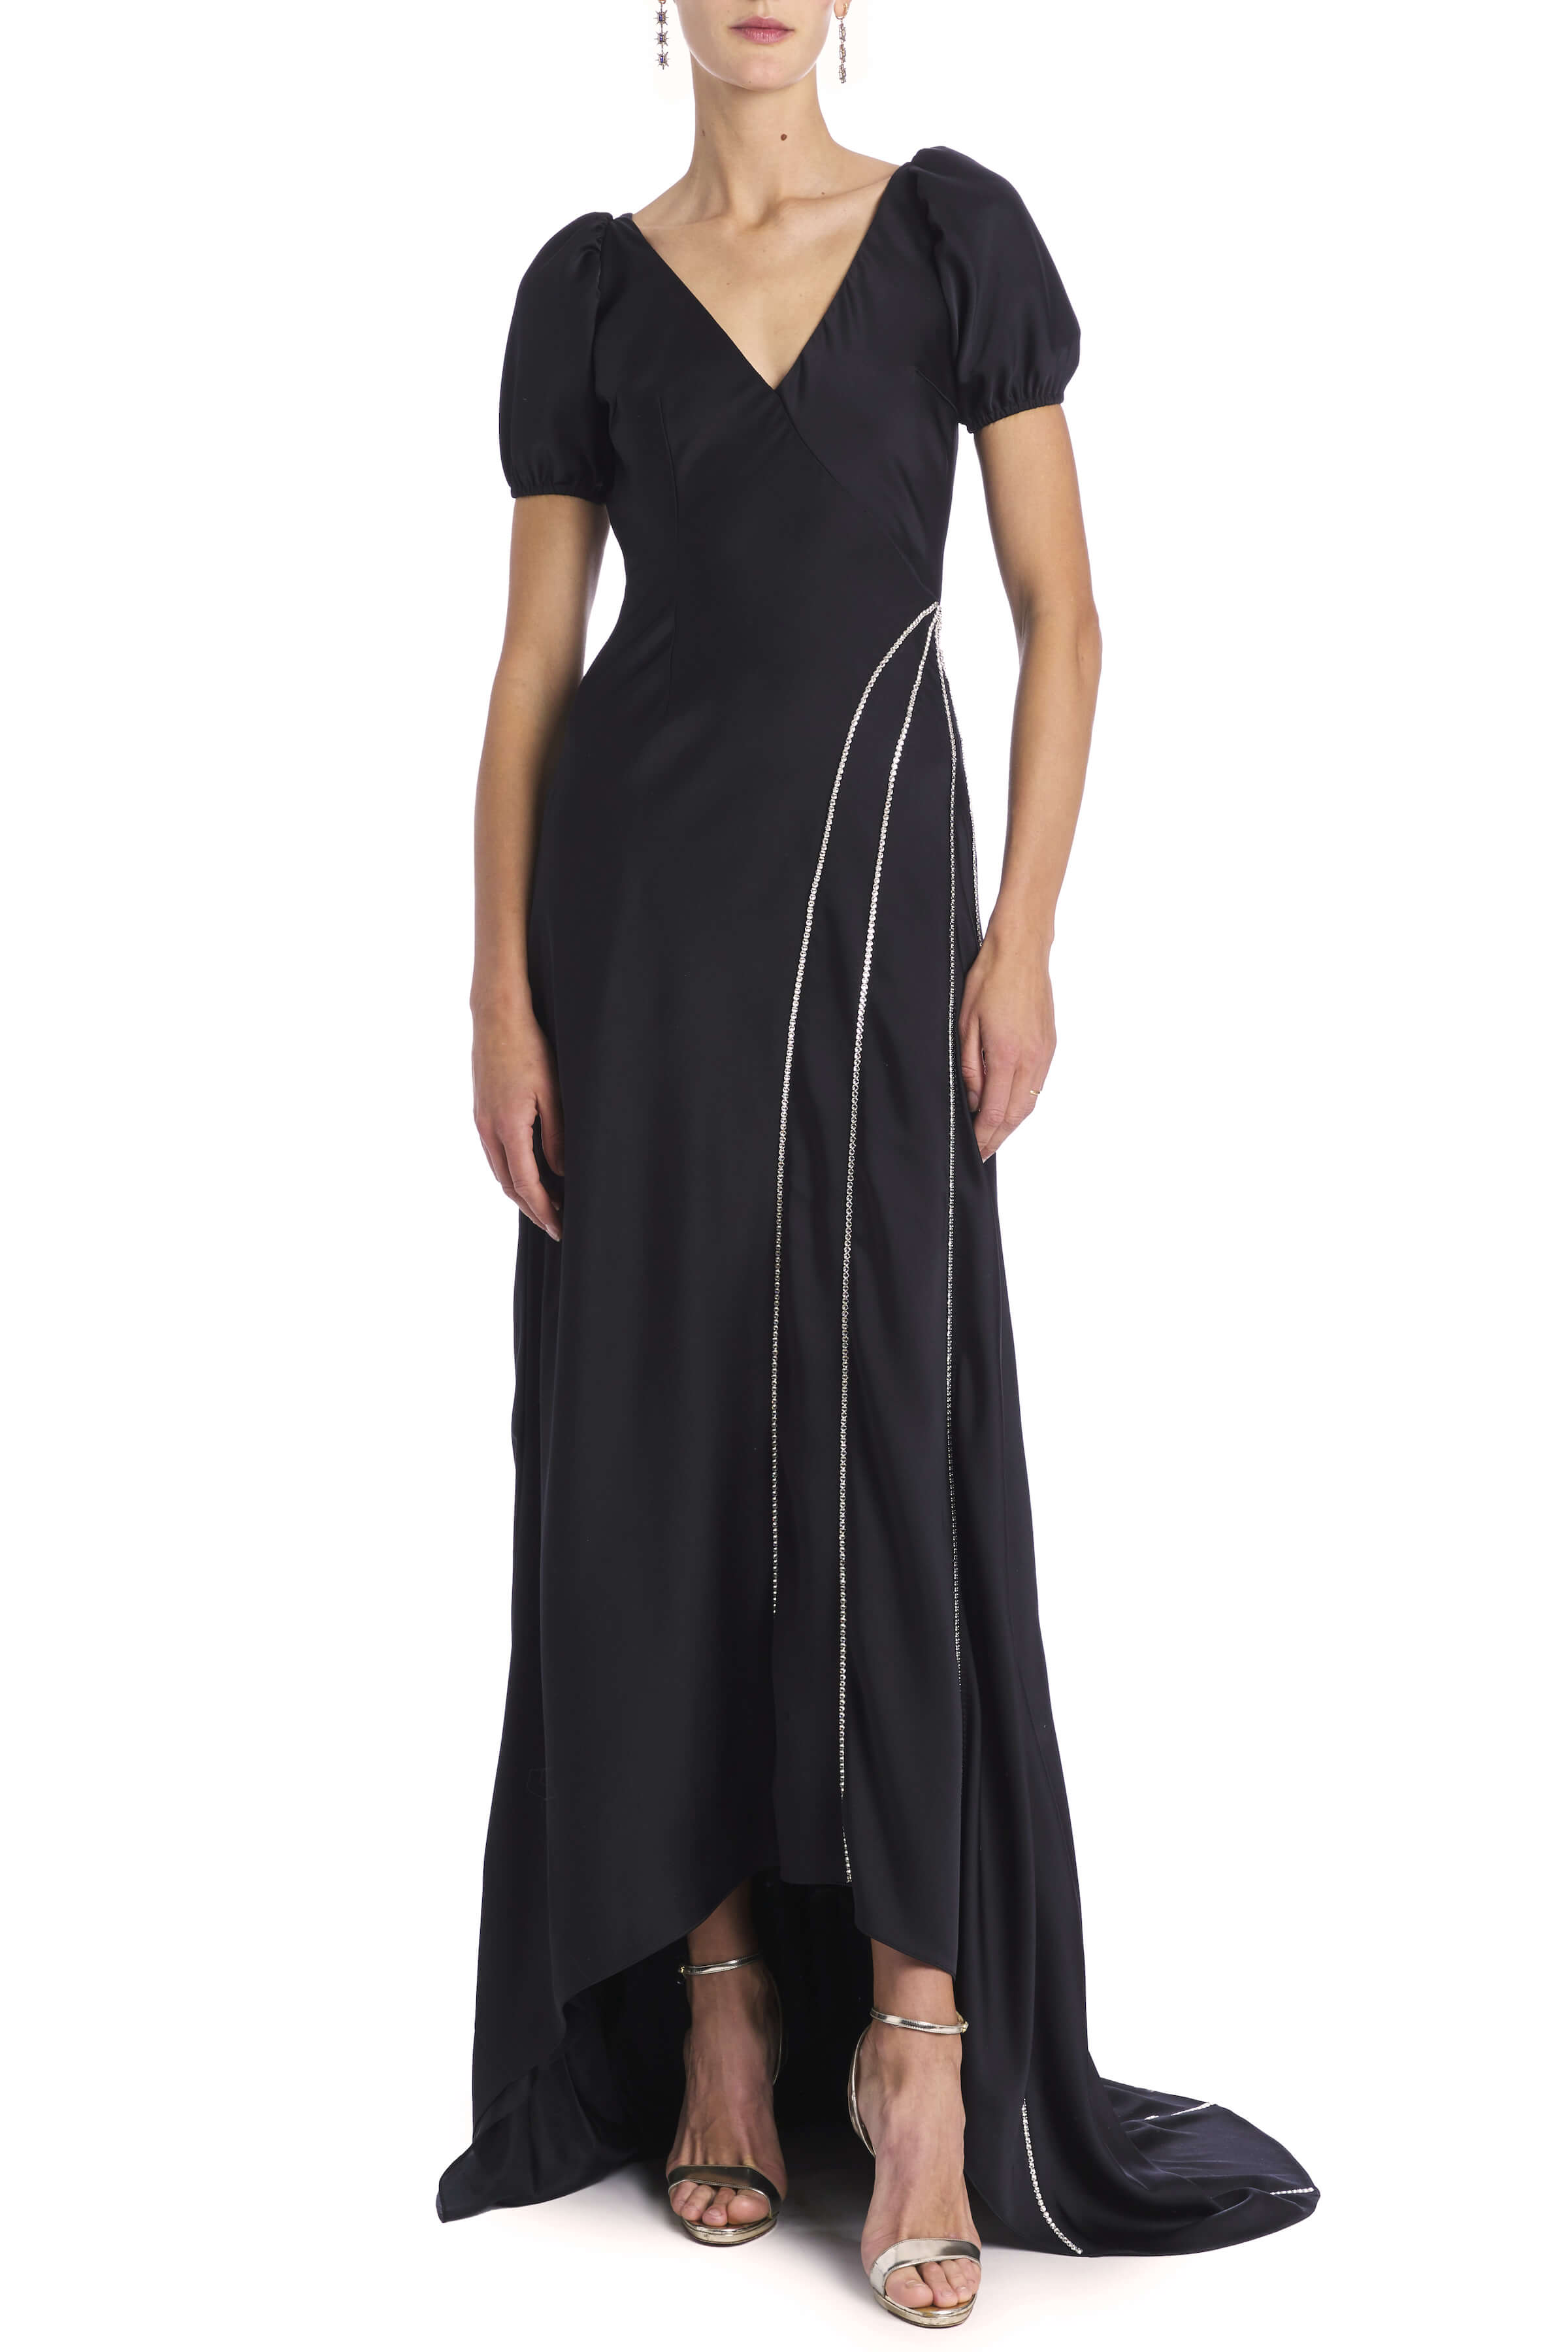 Maxine Black Puff Sleeve Crepe Gown With Swarovski Crystal Seam Details